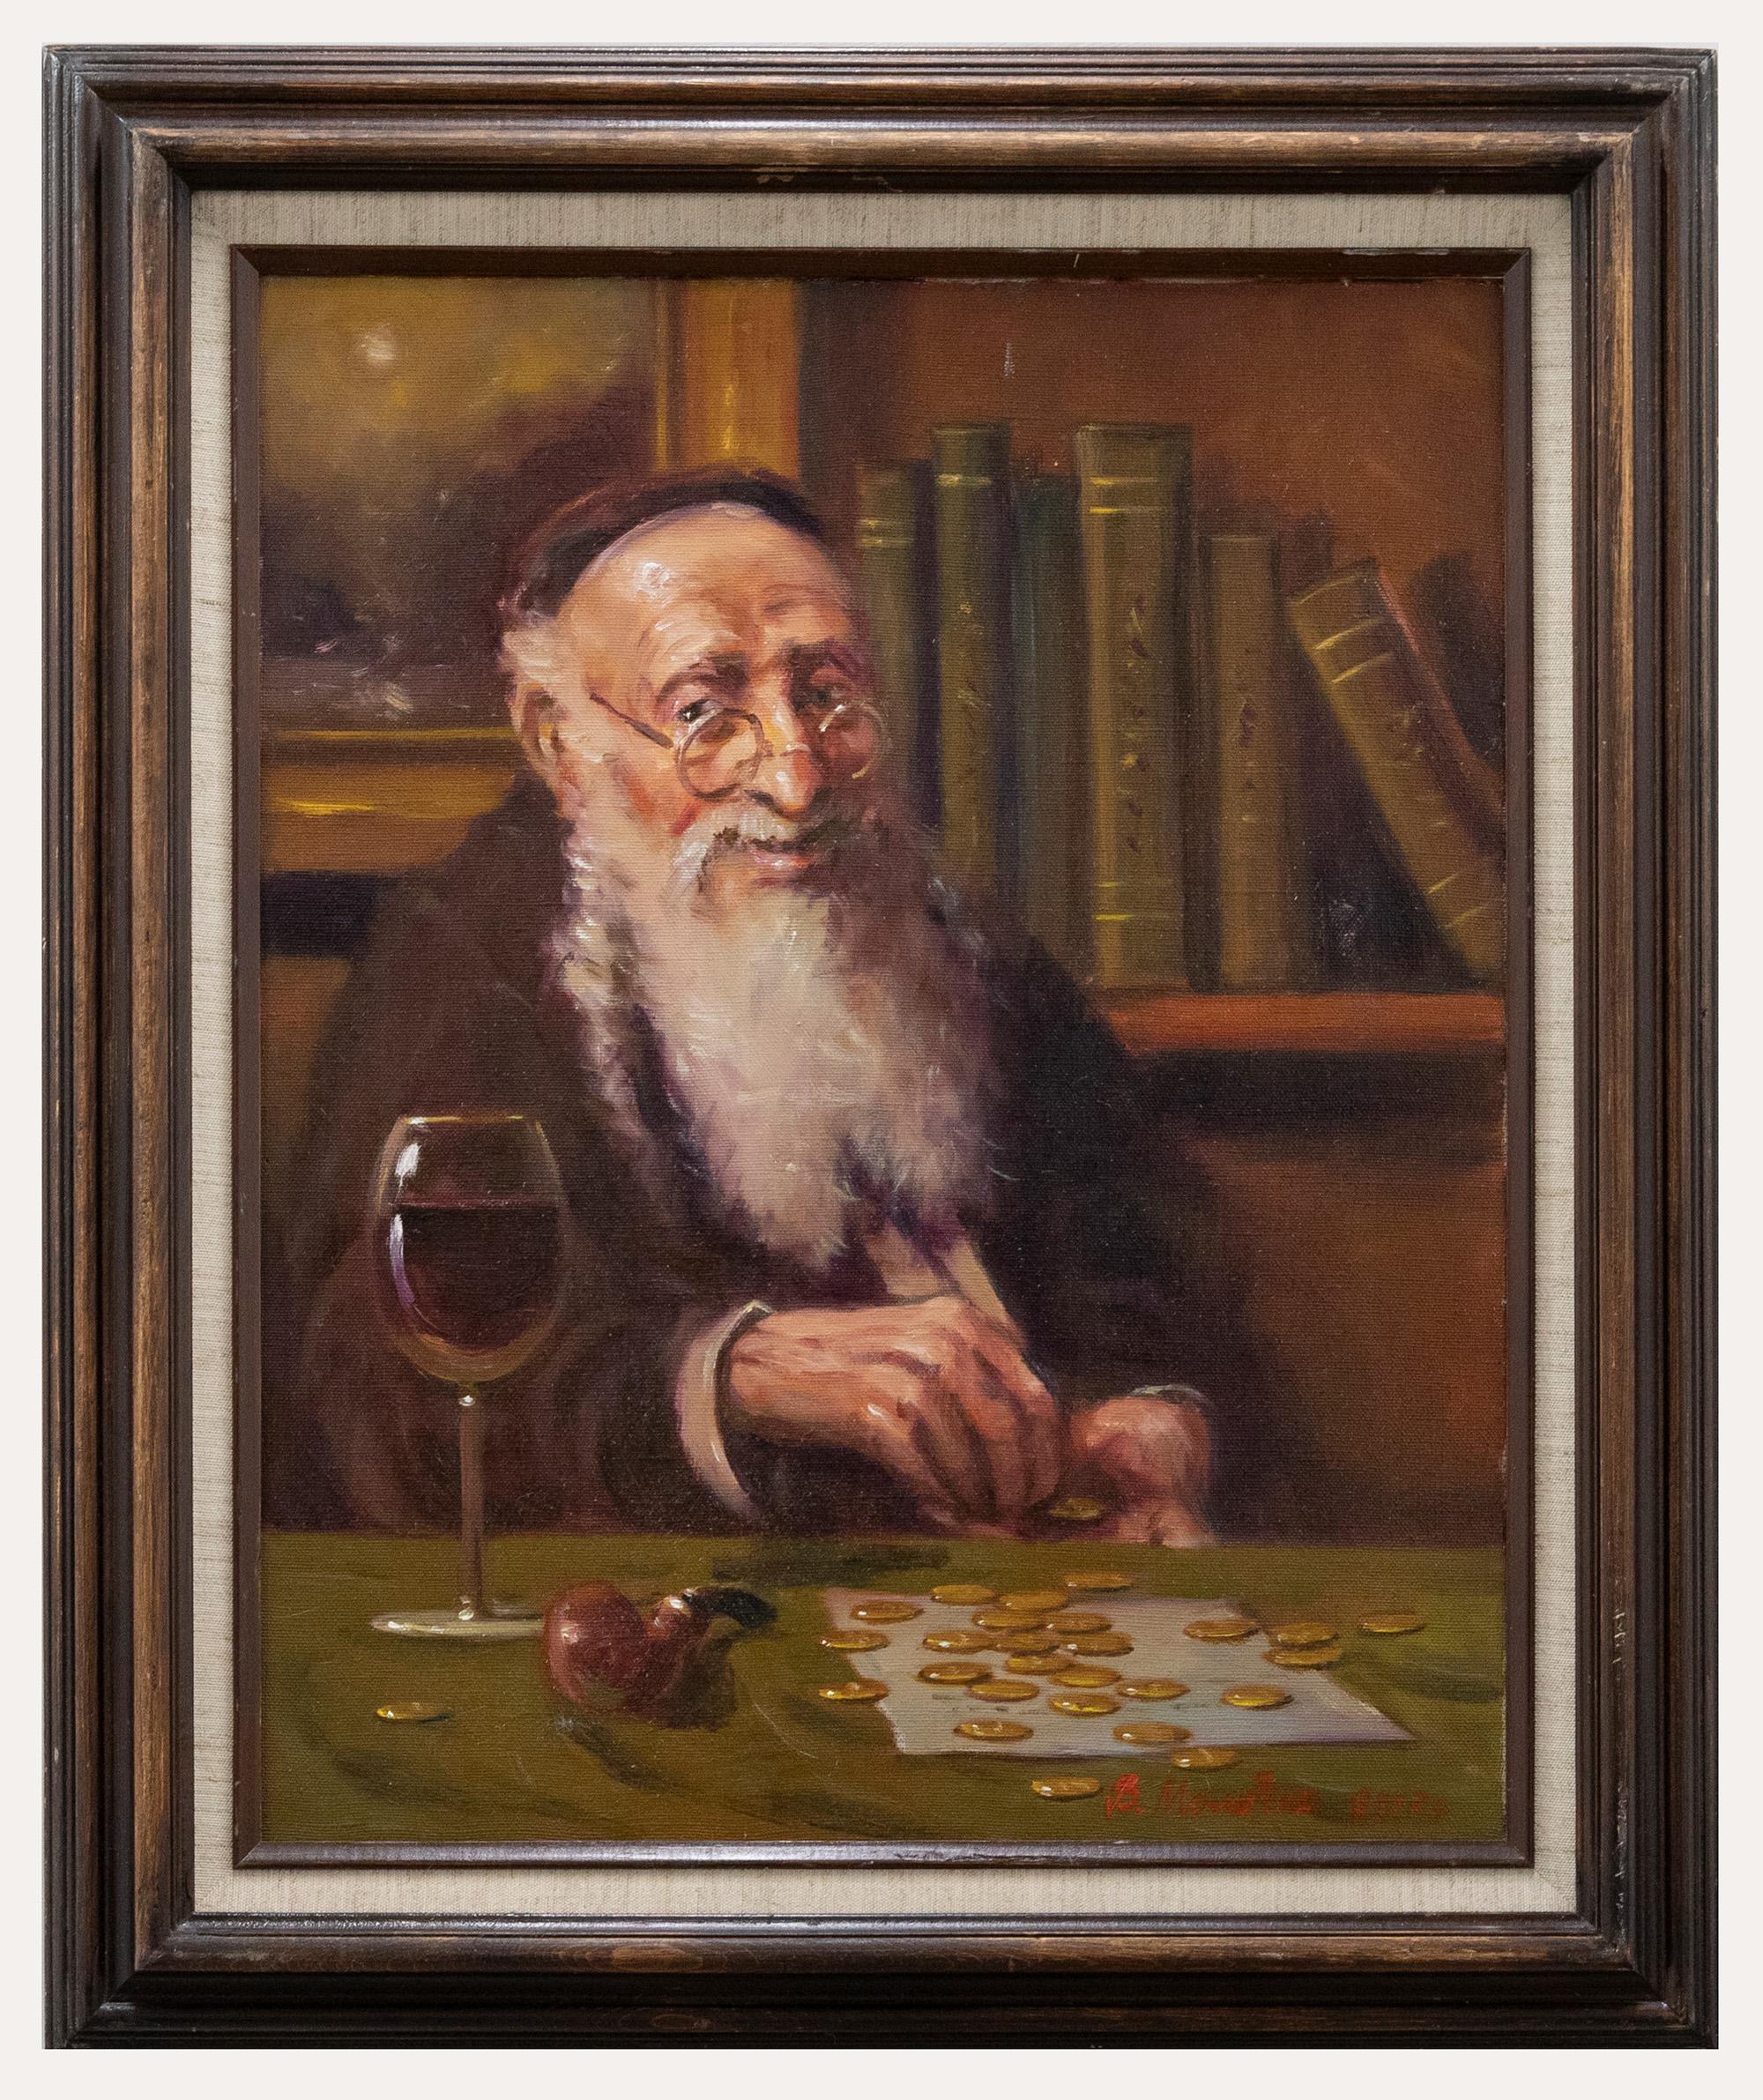 Unknown Portrait Painting - Framed Contemporary Oil - Counting the Coin